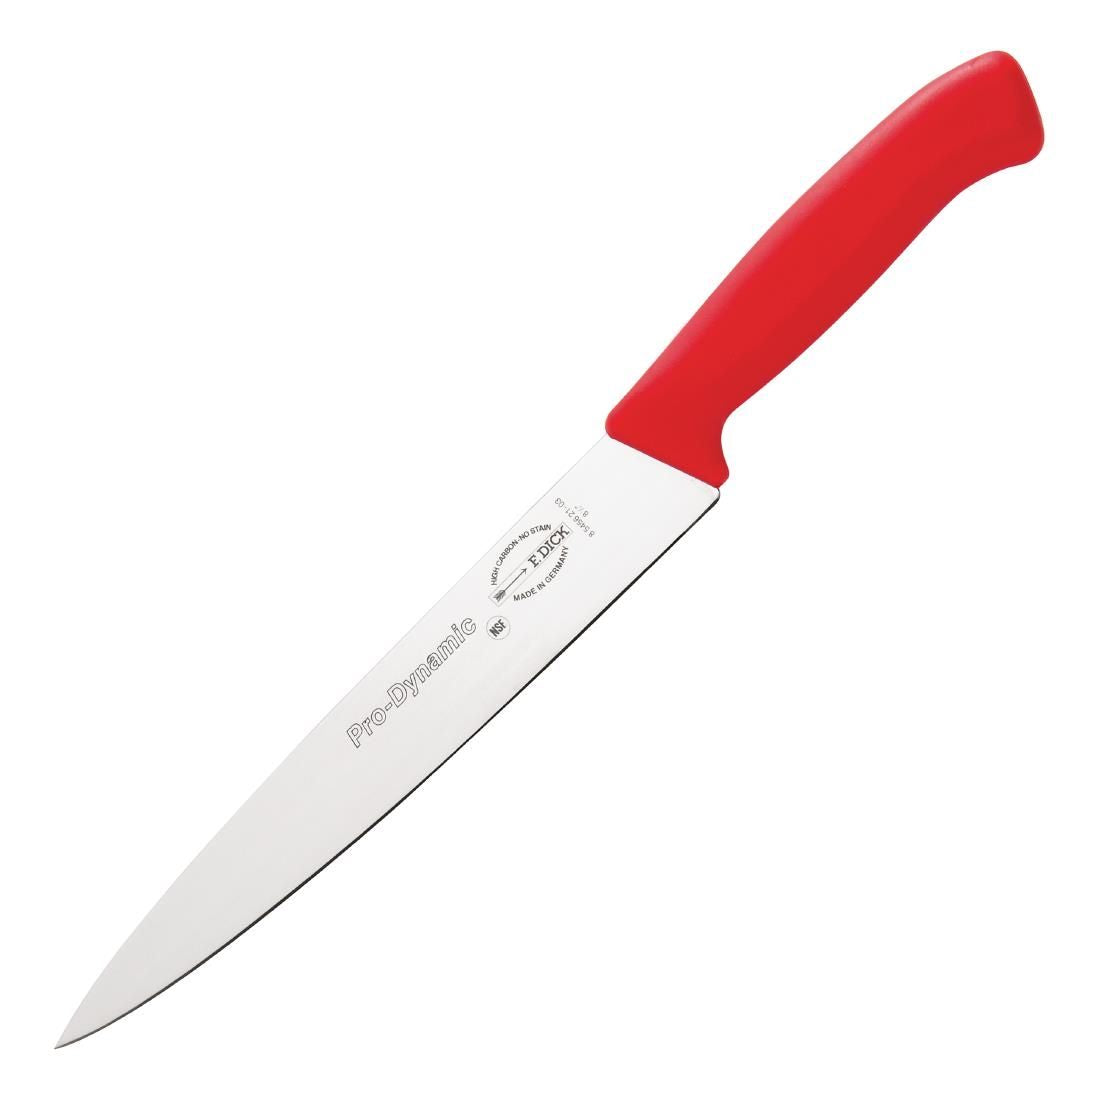 DL343 Dick Pro Dynamic HACCP Slicer Red 21.5cm JD Catering Equipment Solutions Ltd